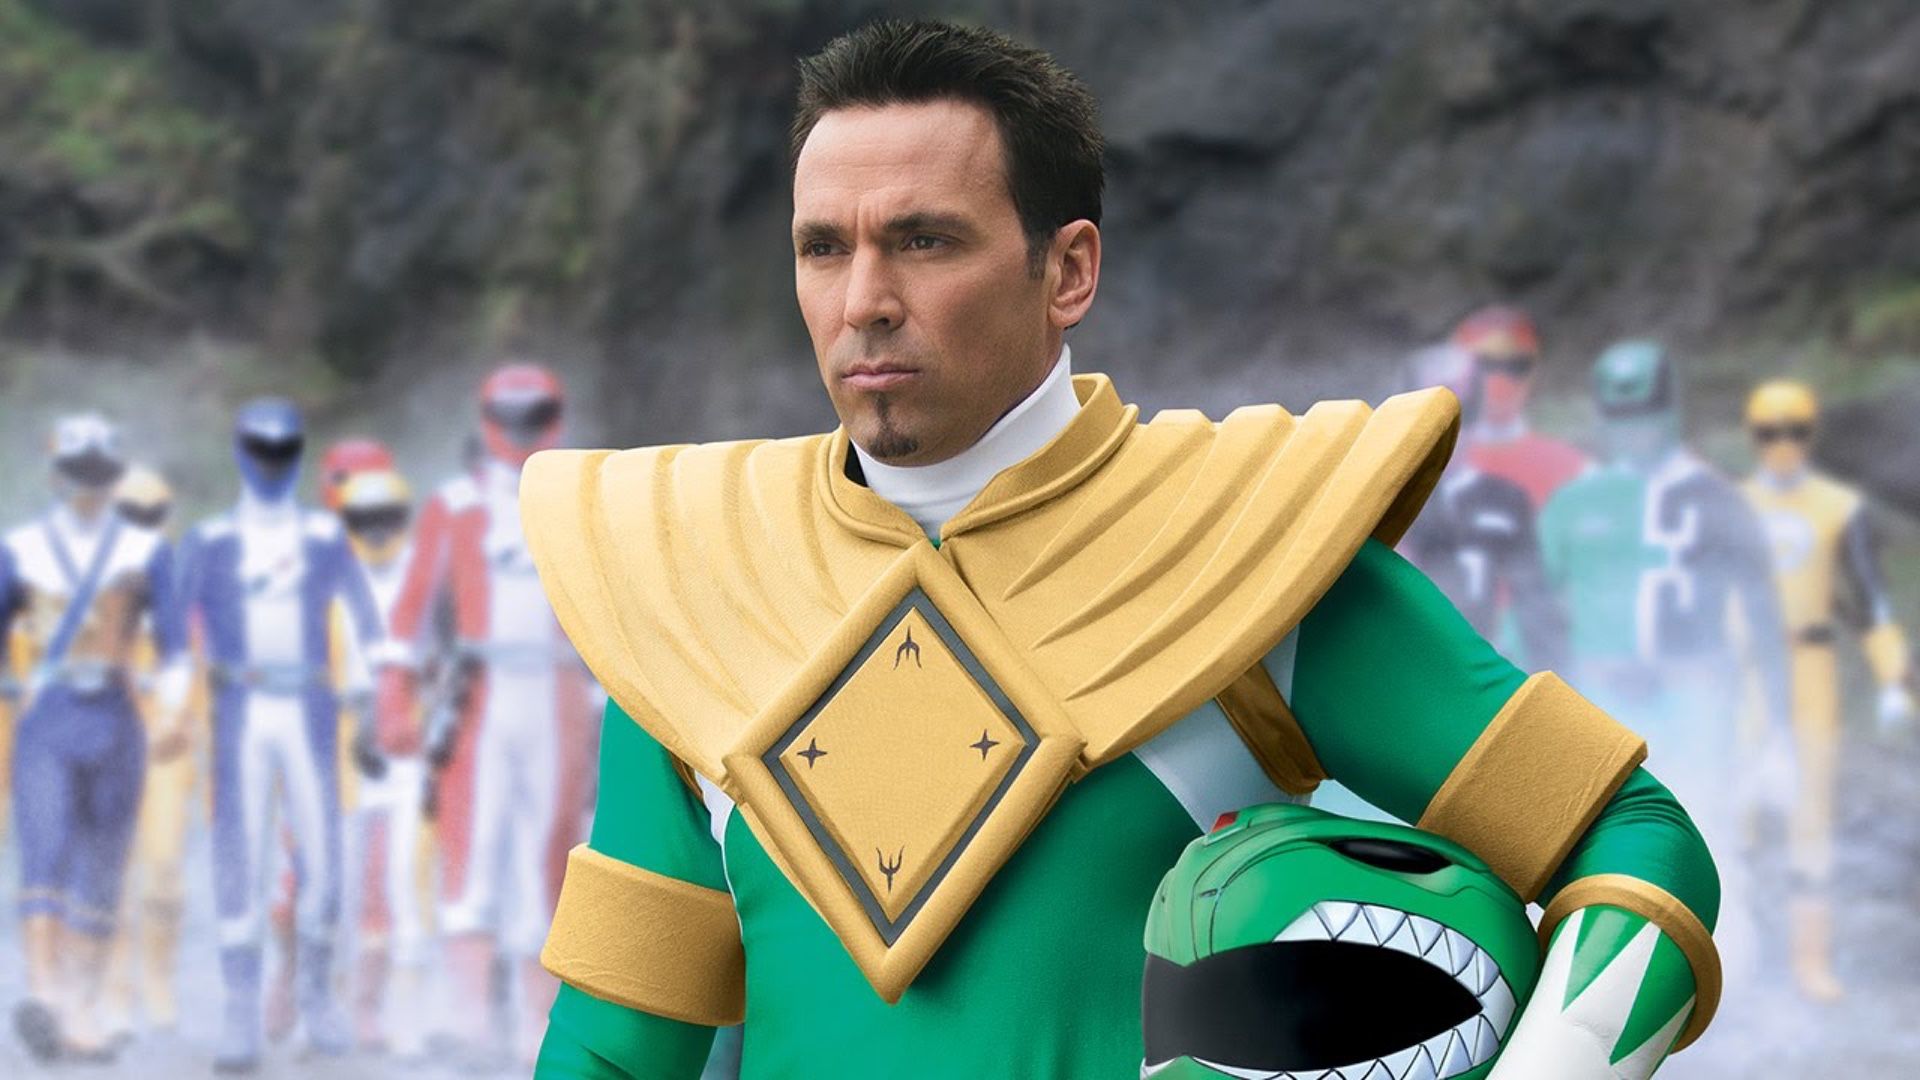 Is Tommy Oliver making a comeback